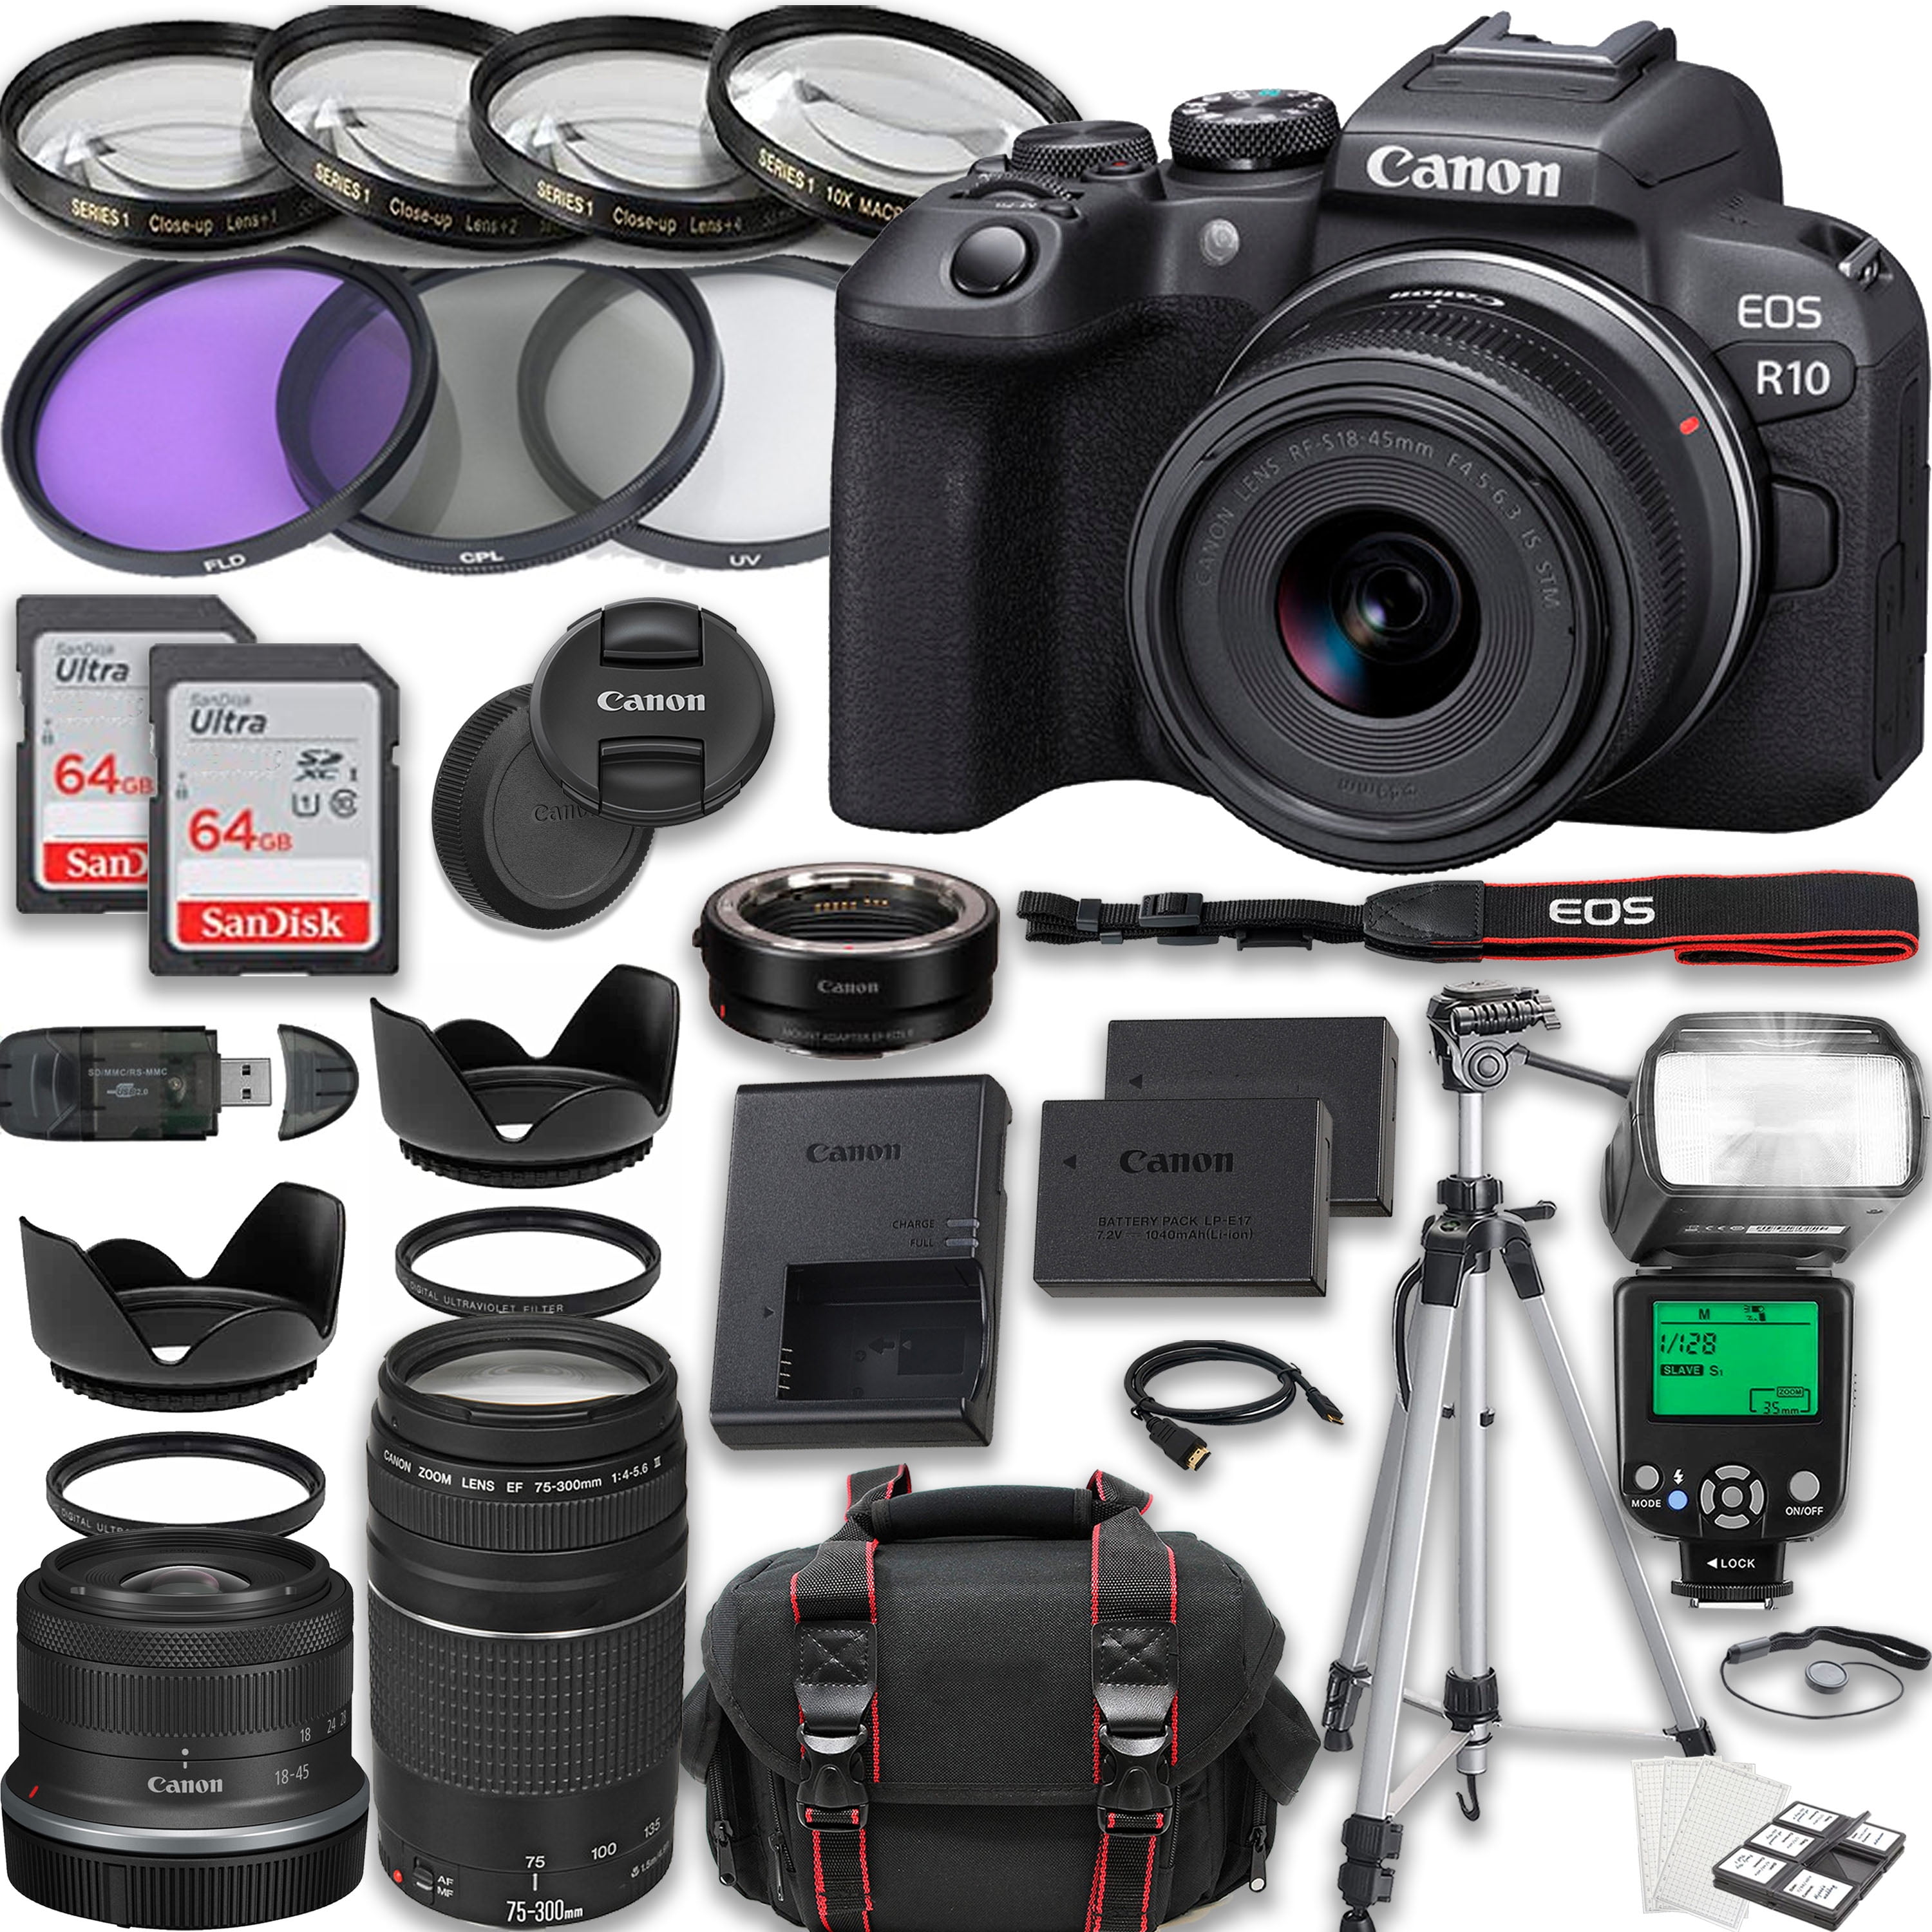  Canon EOS R7 Mirrorless Camera w/RF-S 18-150mm f/3.5-6.3 is  STM Lens + 2X 64GB Memory + Case + Filters + TTL Flash + More (35pc Bundle)  : Electronics